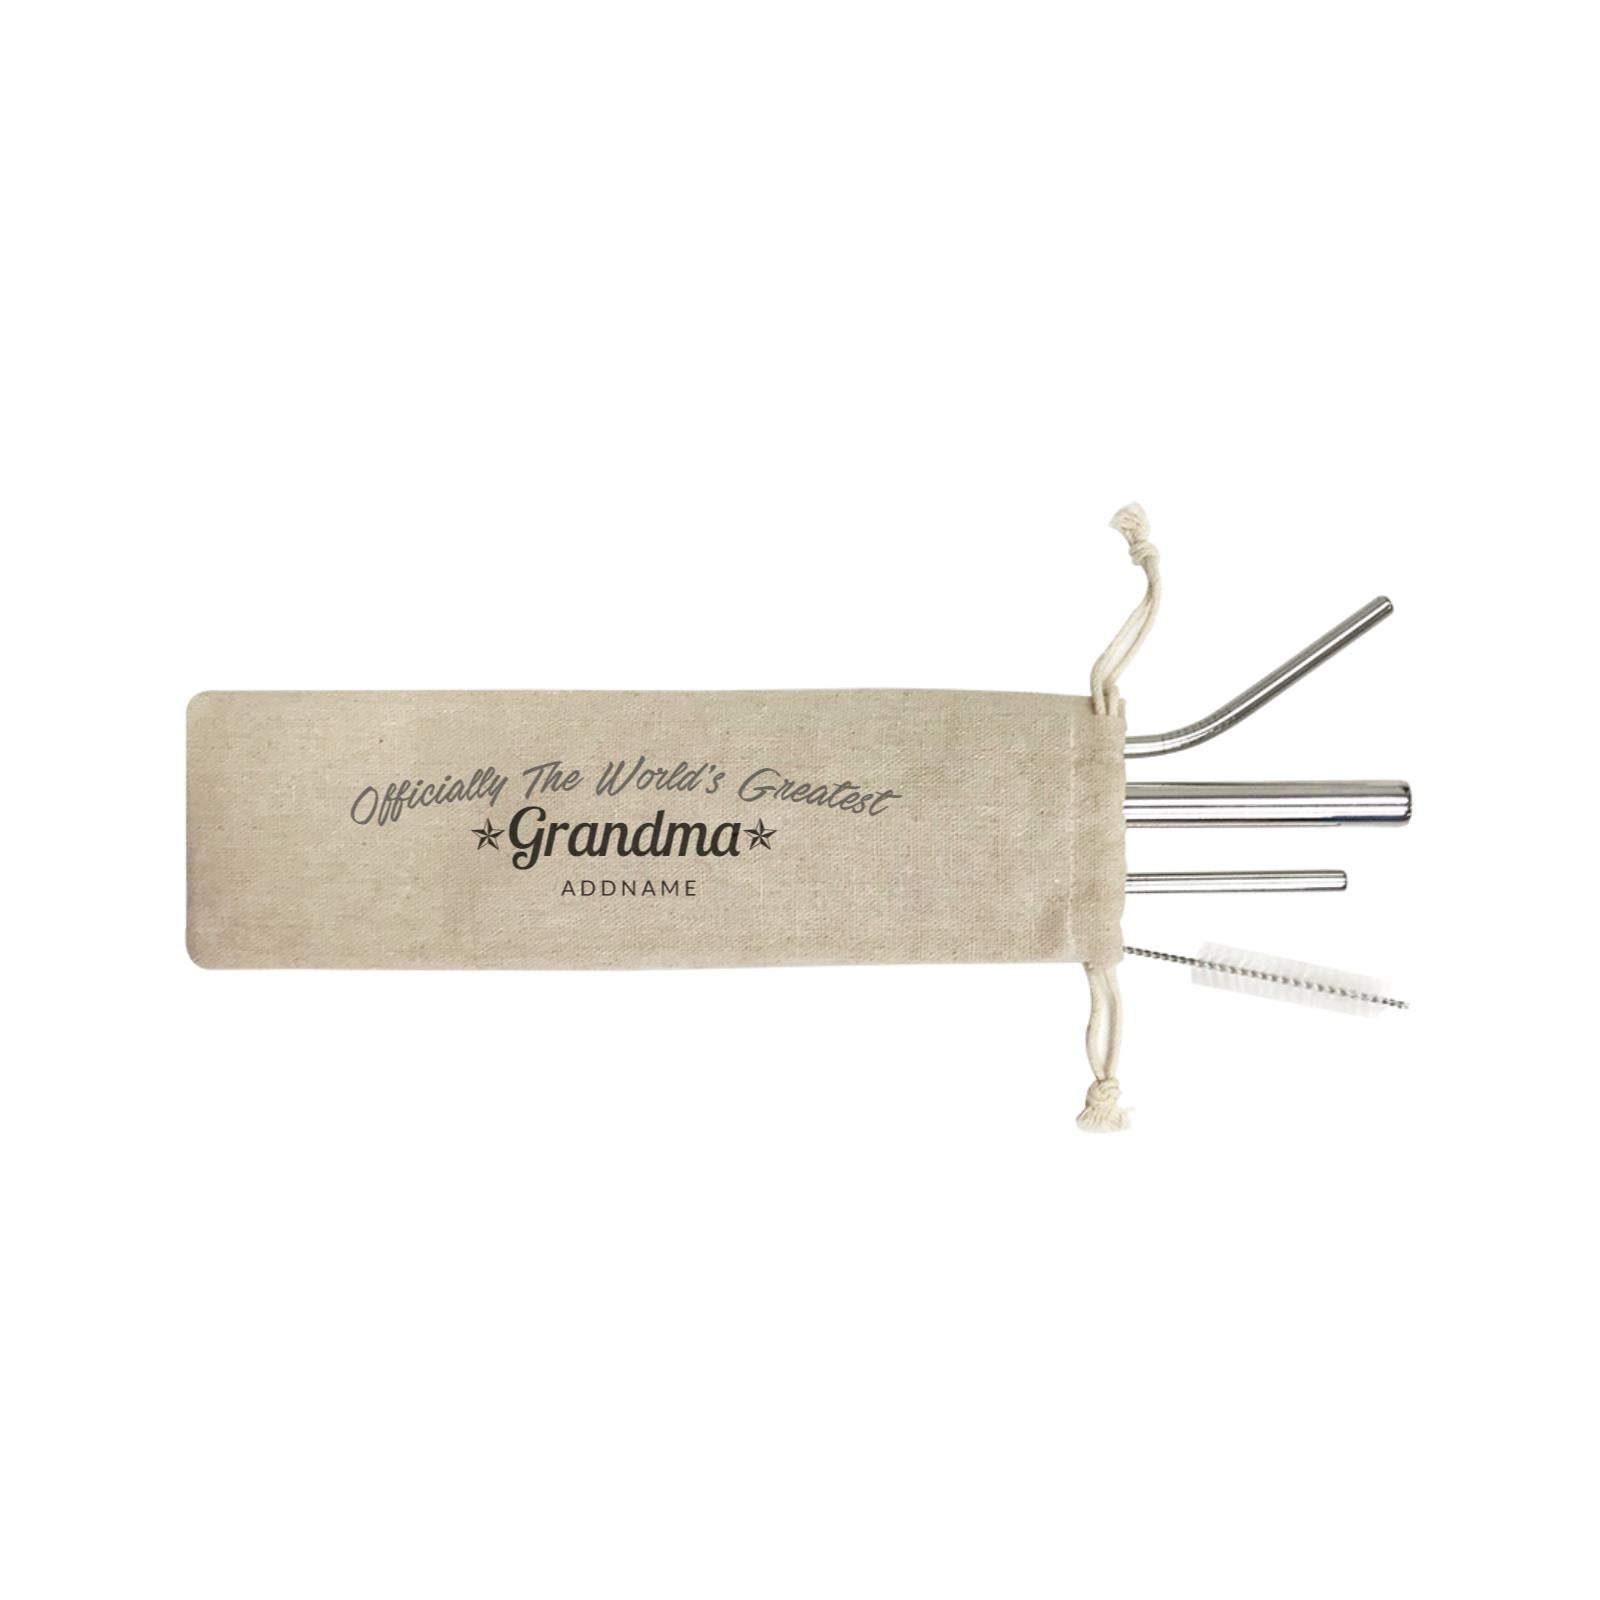 Officially Worlds Greatest Family Grandma Addname SB 4-In-1 Stainless Steel Straw Set in Satchel